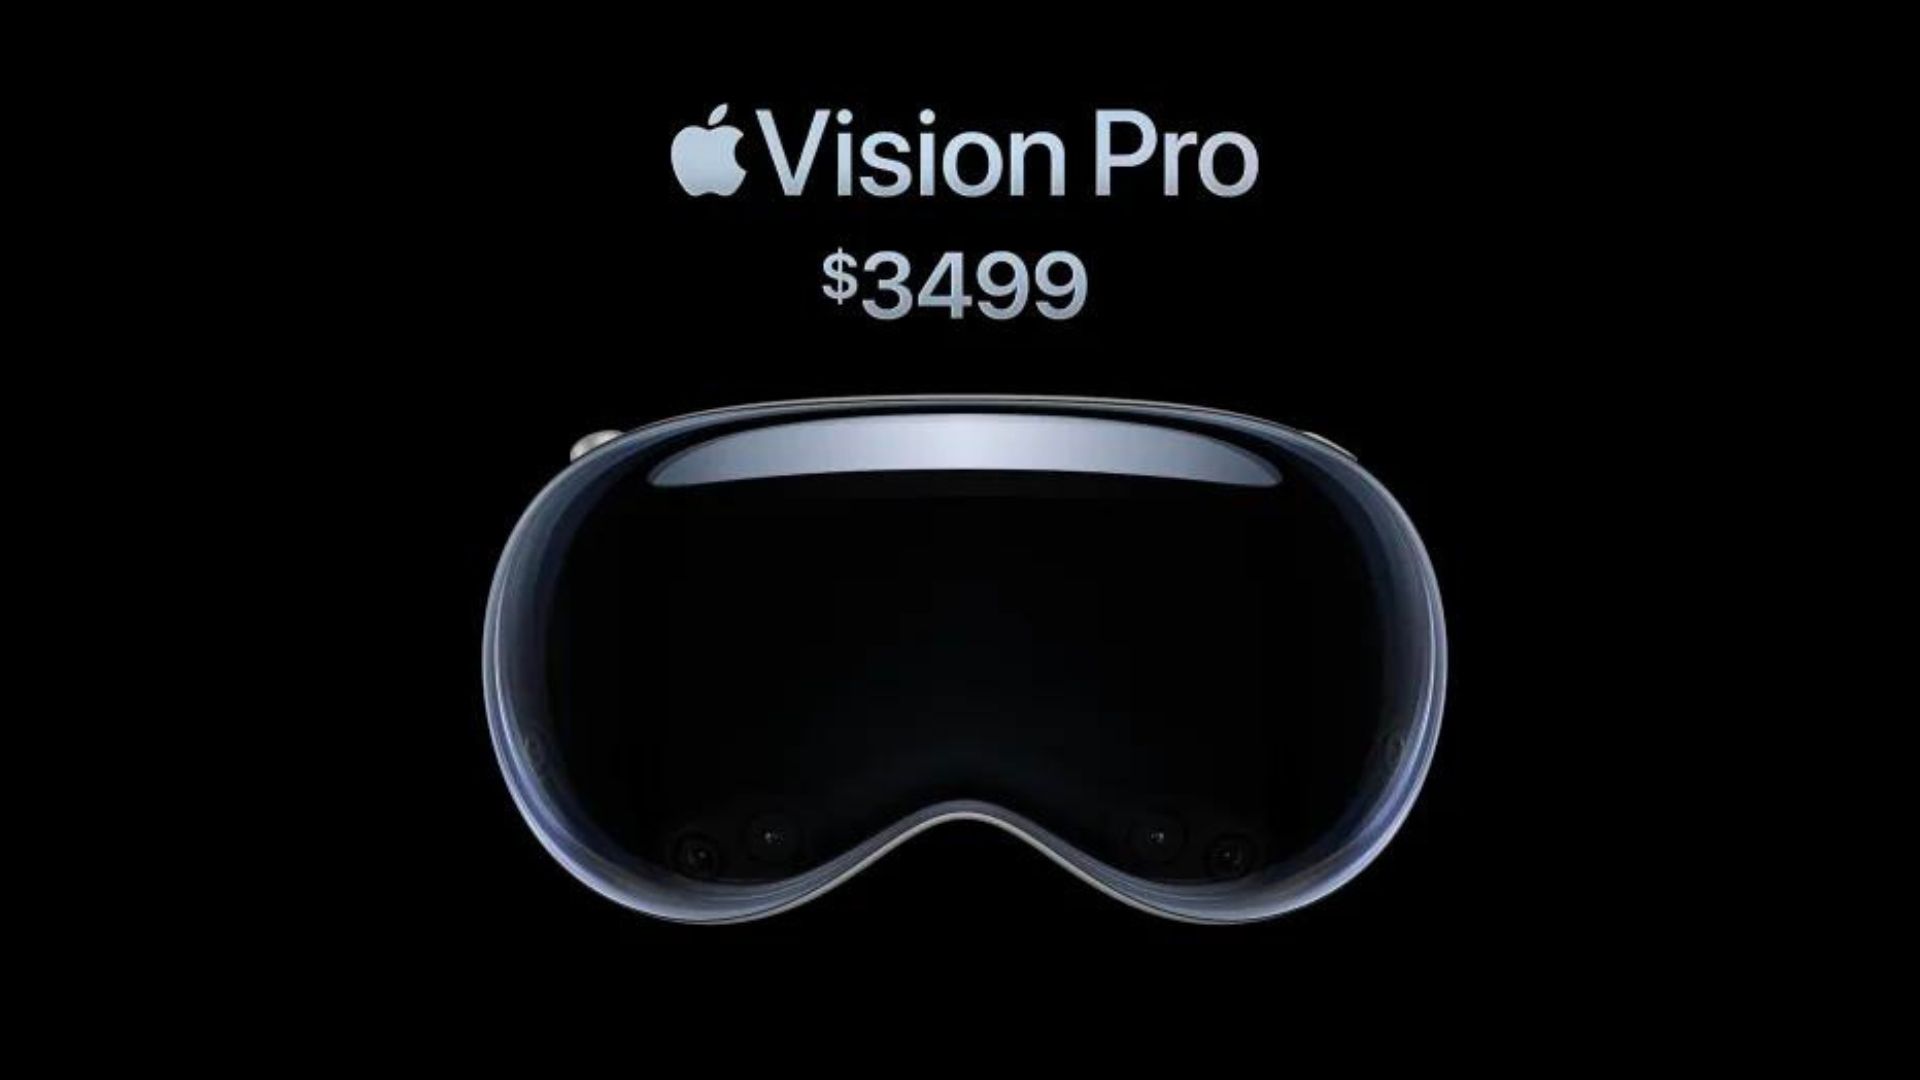 Apple uses the charm pricing tactic for the apple vision pro